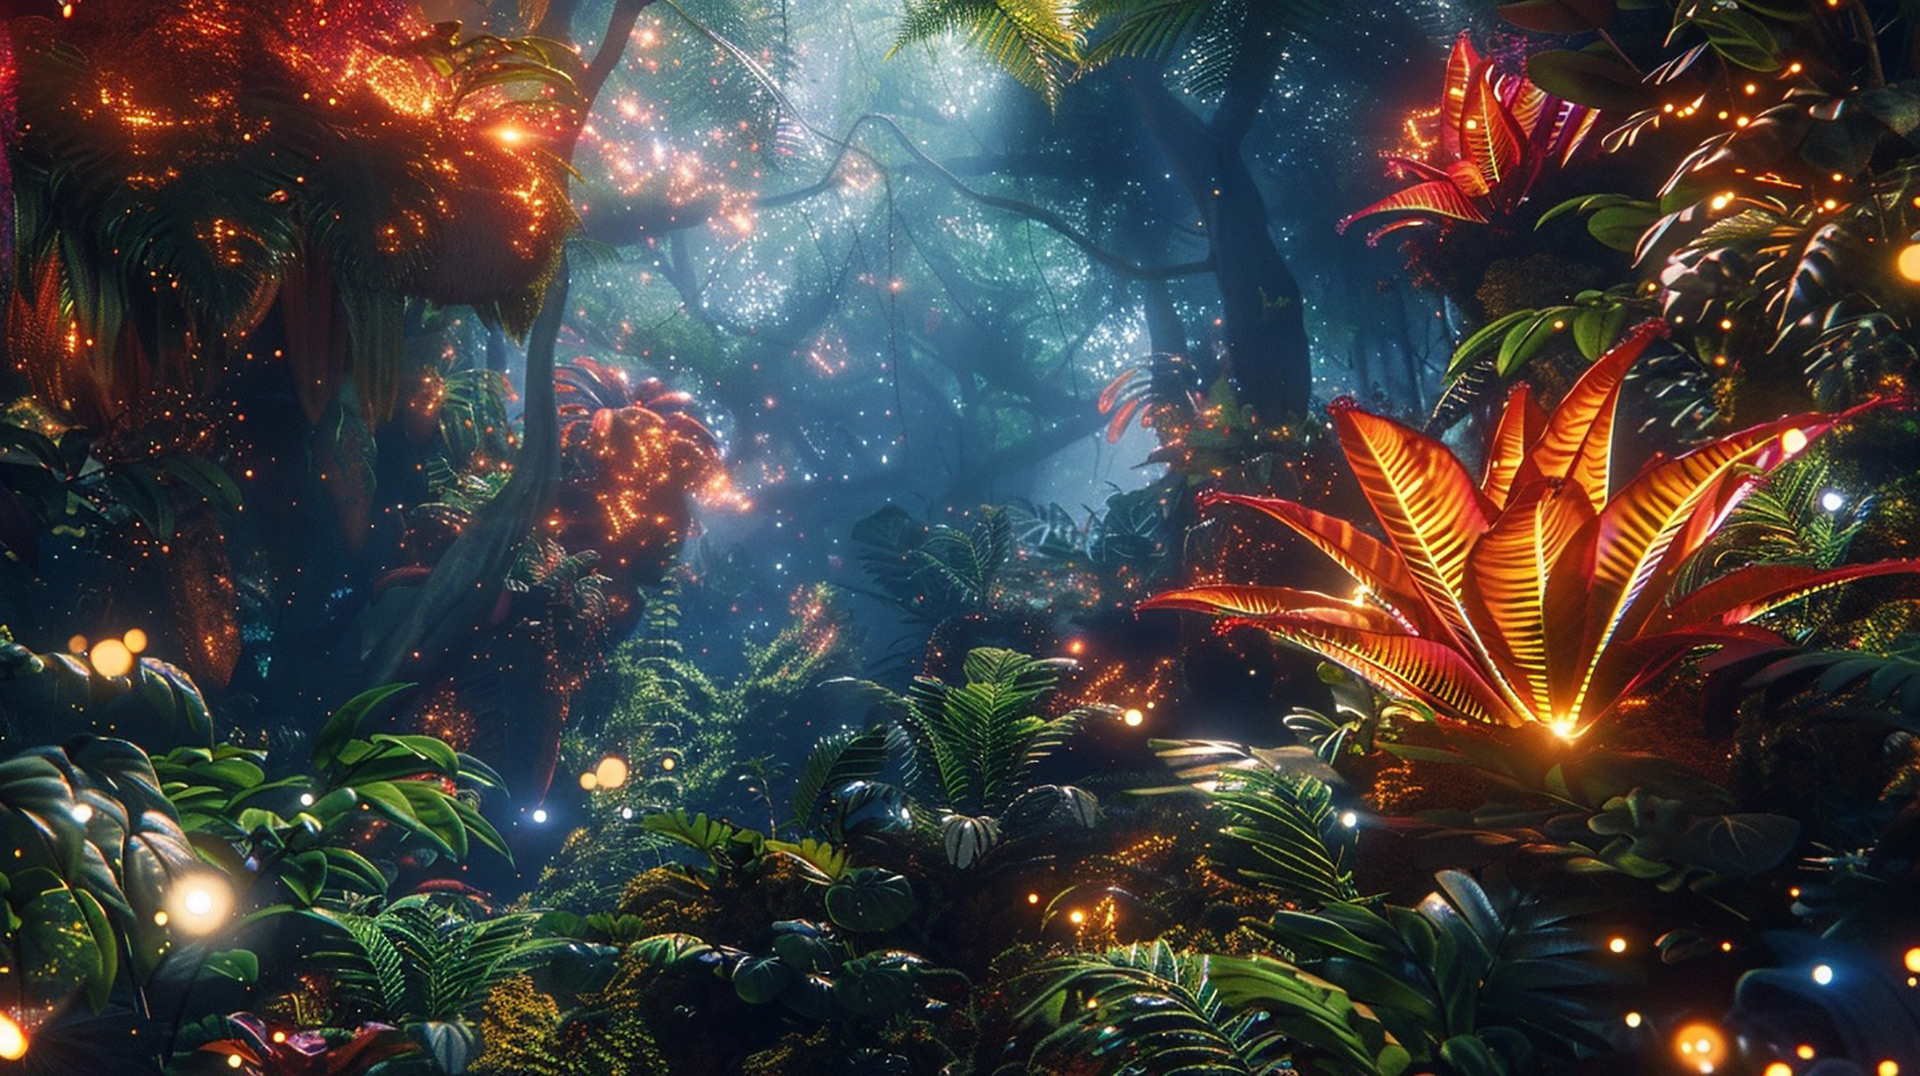 Tropical Flora: Exquisite Jungle Plants in 4K Wallpapers